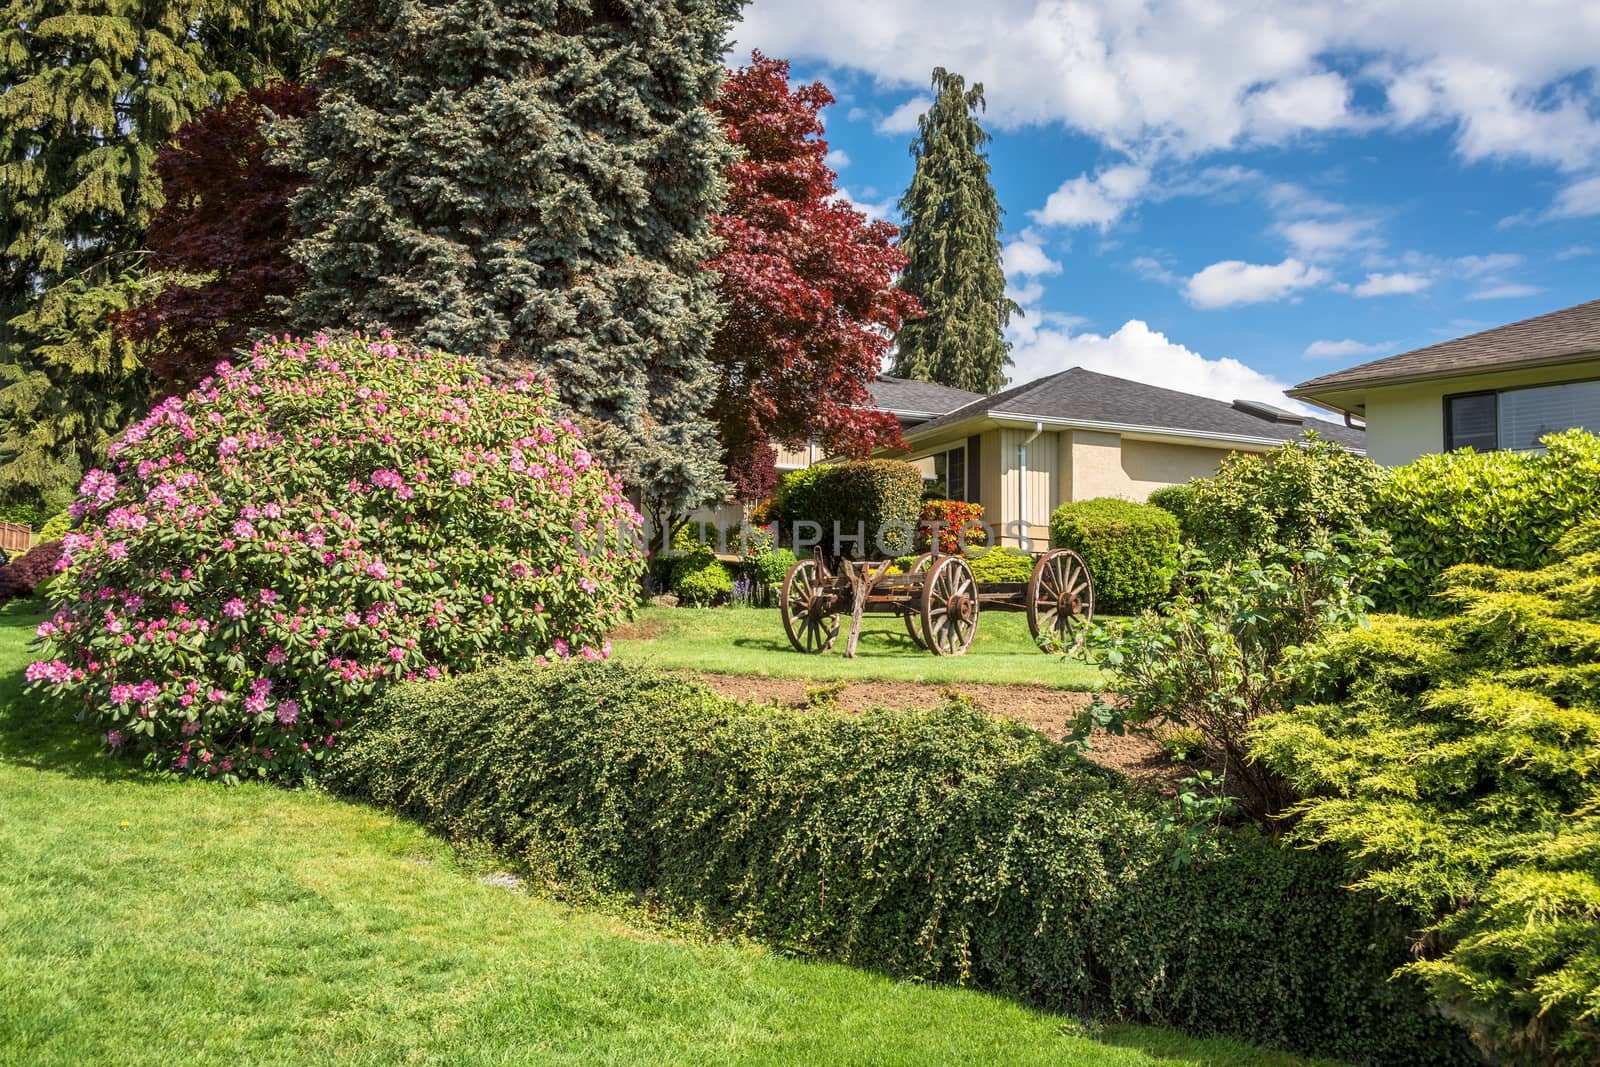 Creatively landscaped yard in residential community with old horse vehicle on green lawn